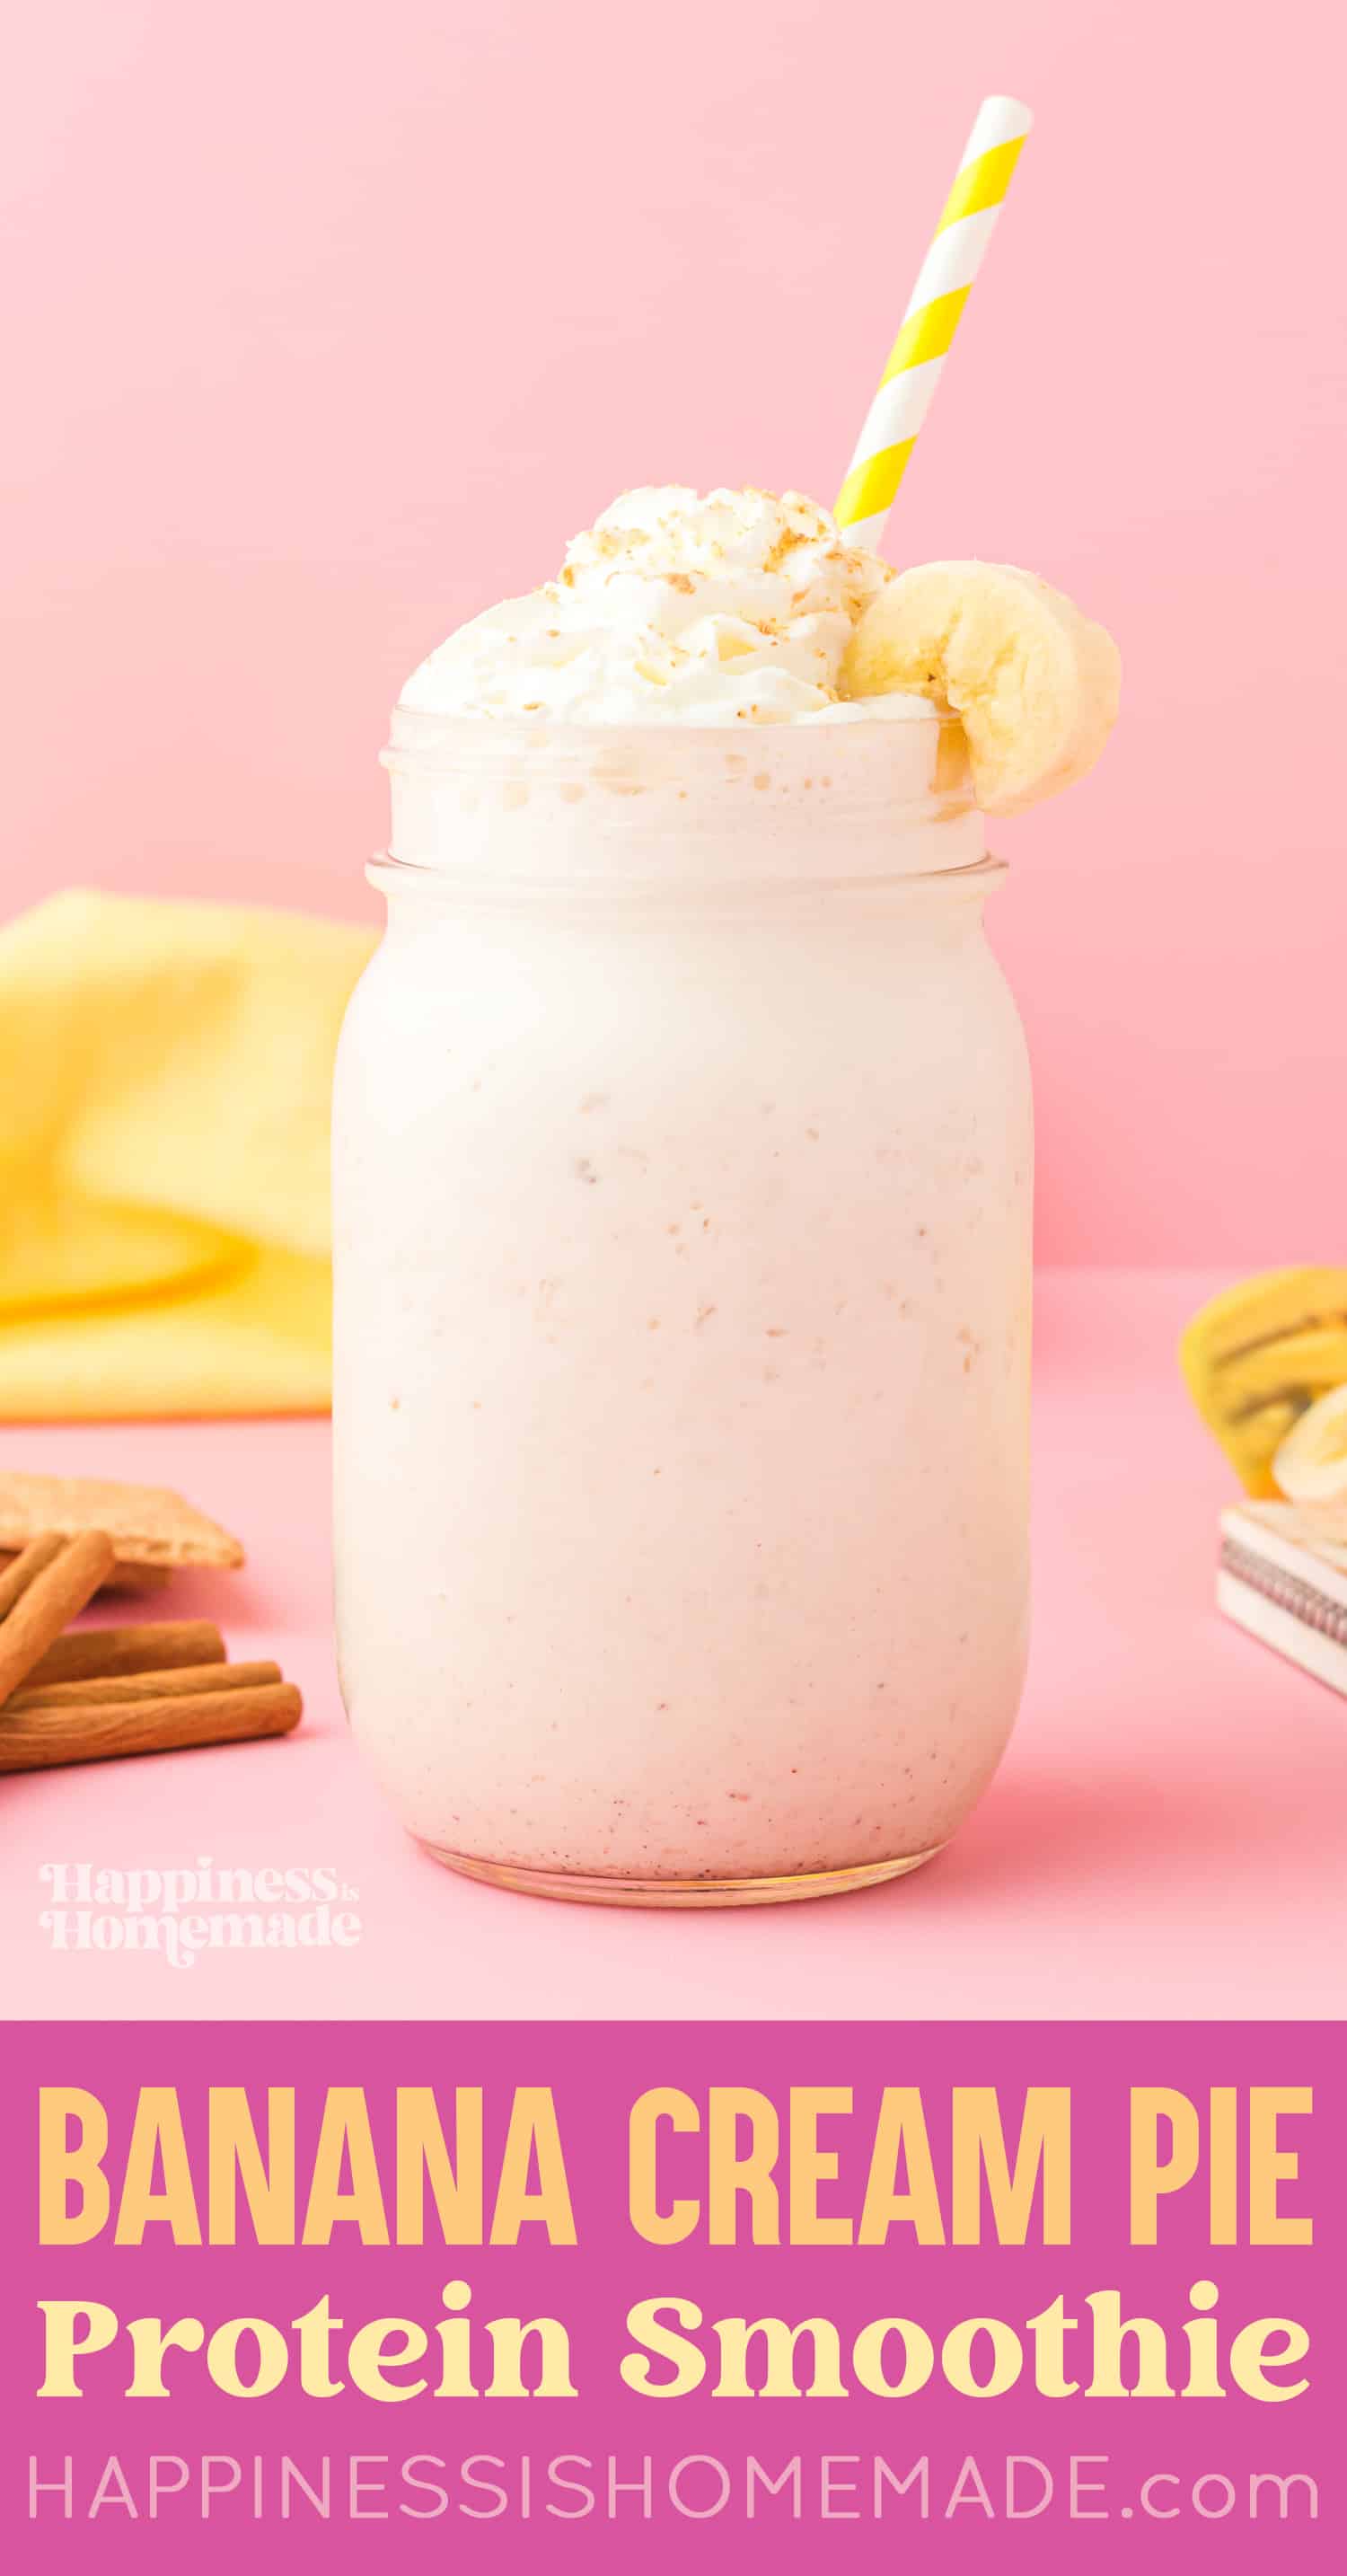 "Banana Cream Pie Protein Smoothie" graphic with image of banana smoothie in mason jar on pink background